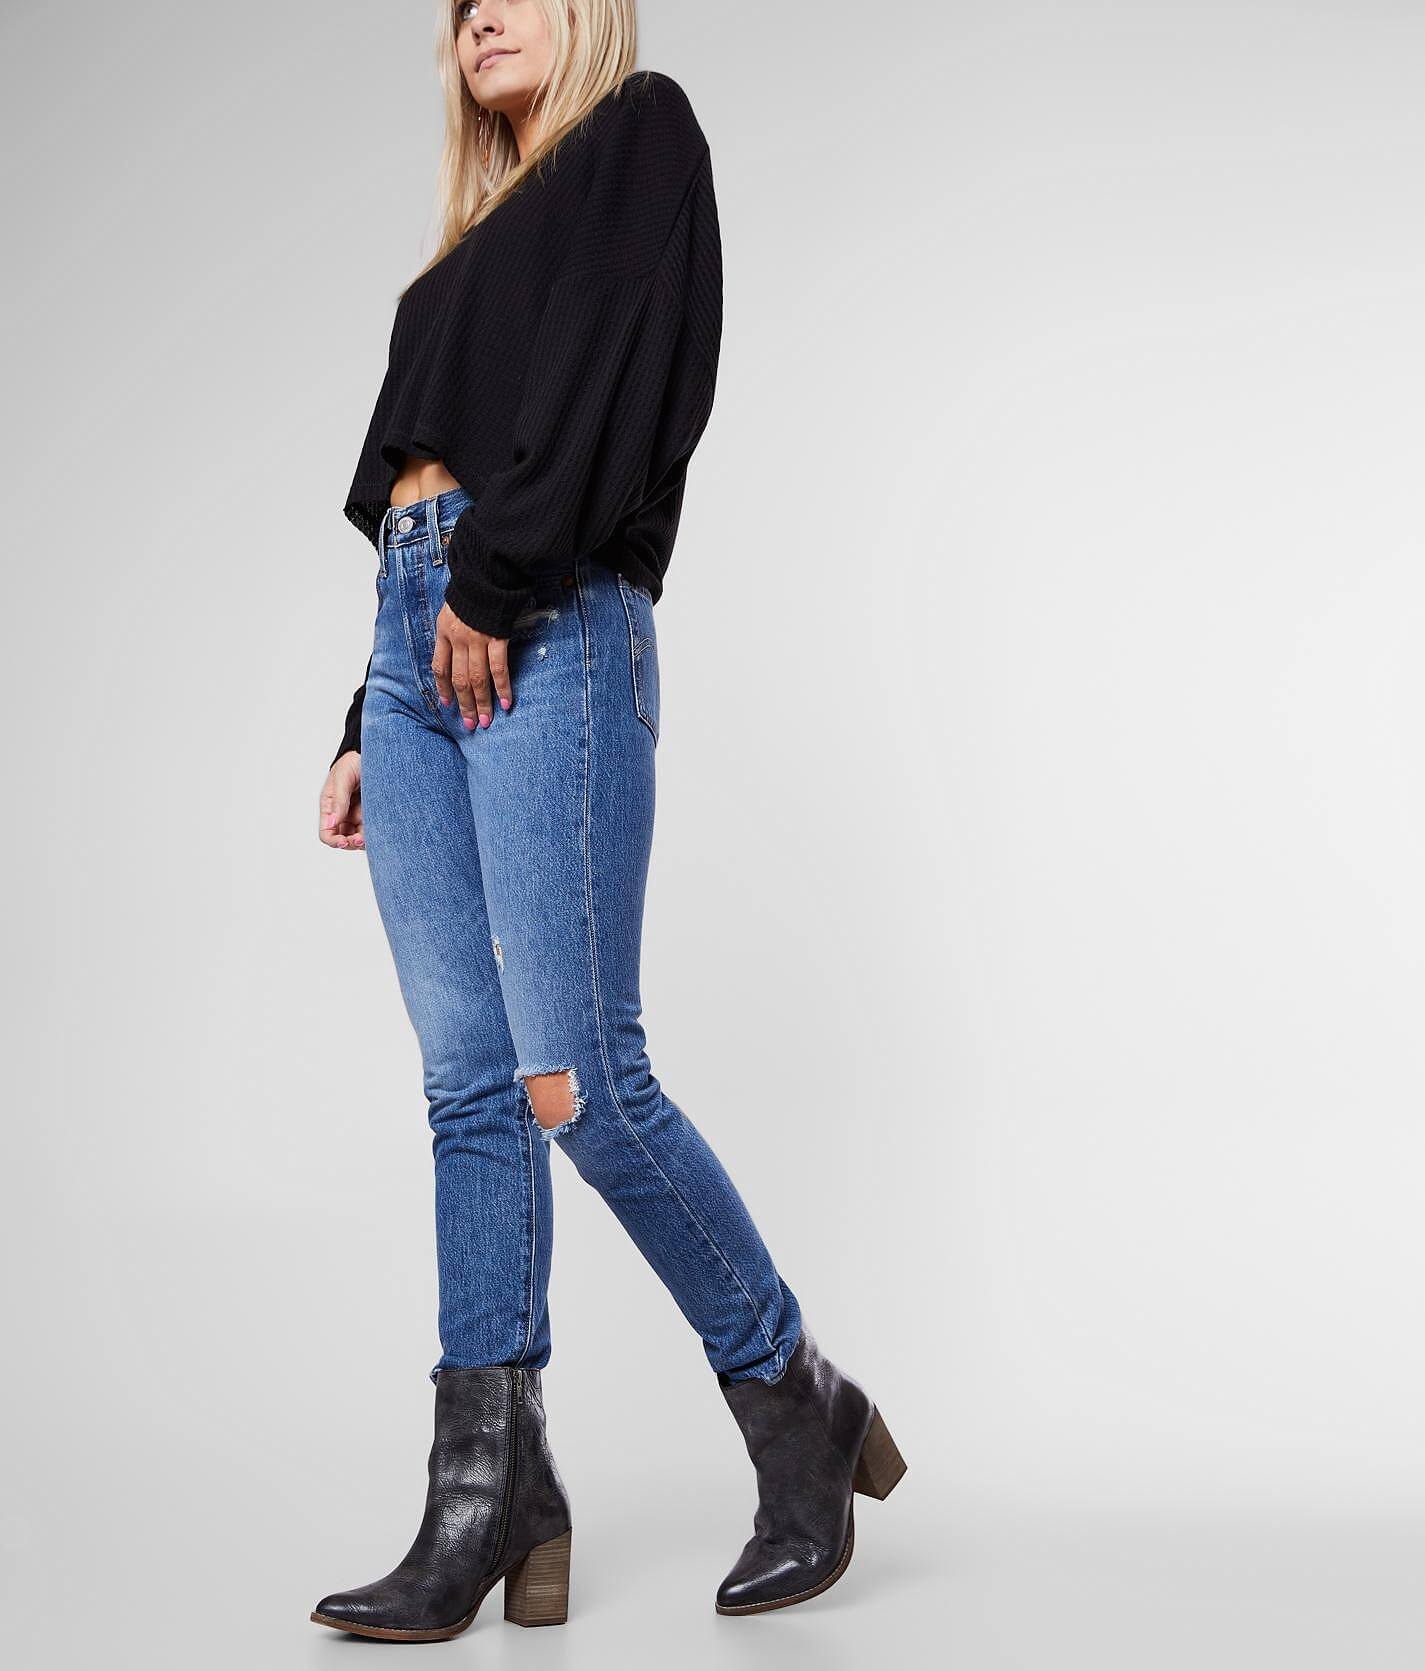 Levi's 501 High Rise Skinny Jean Clearance Sale, UP TO 56% OFF 